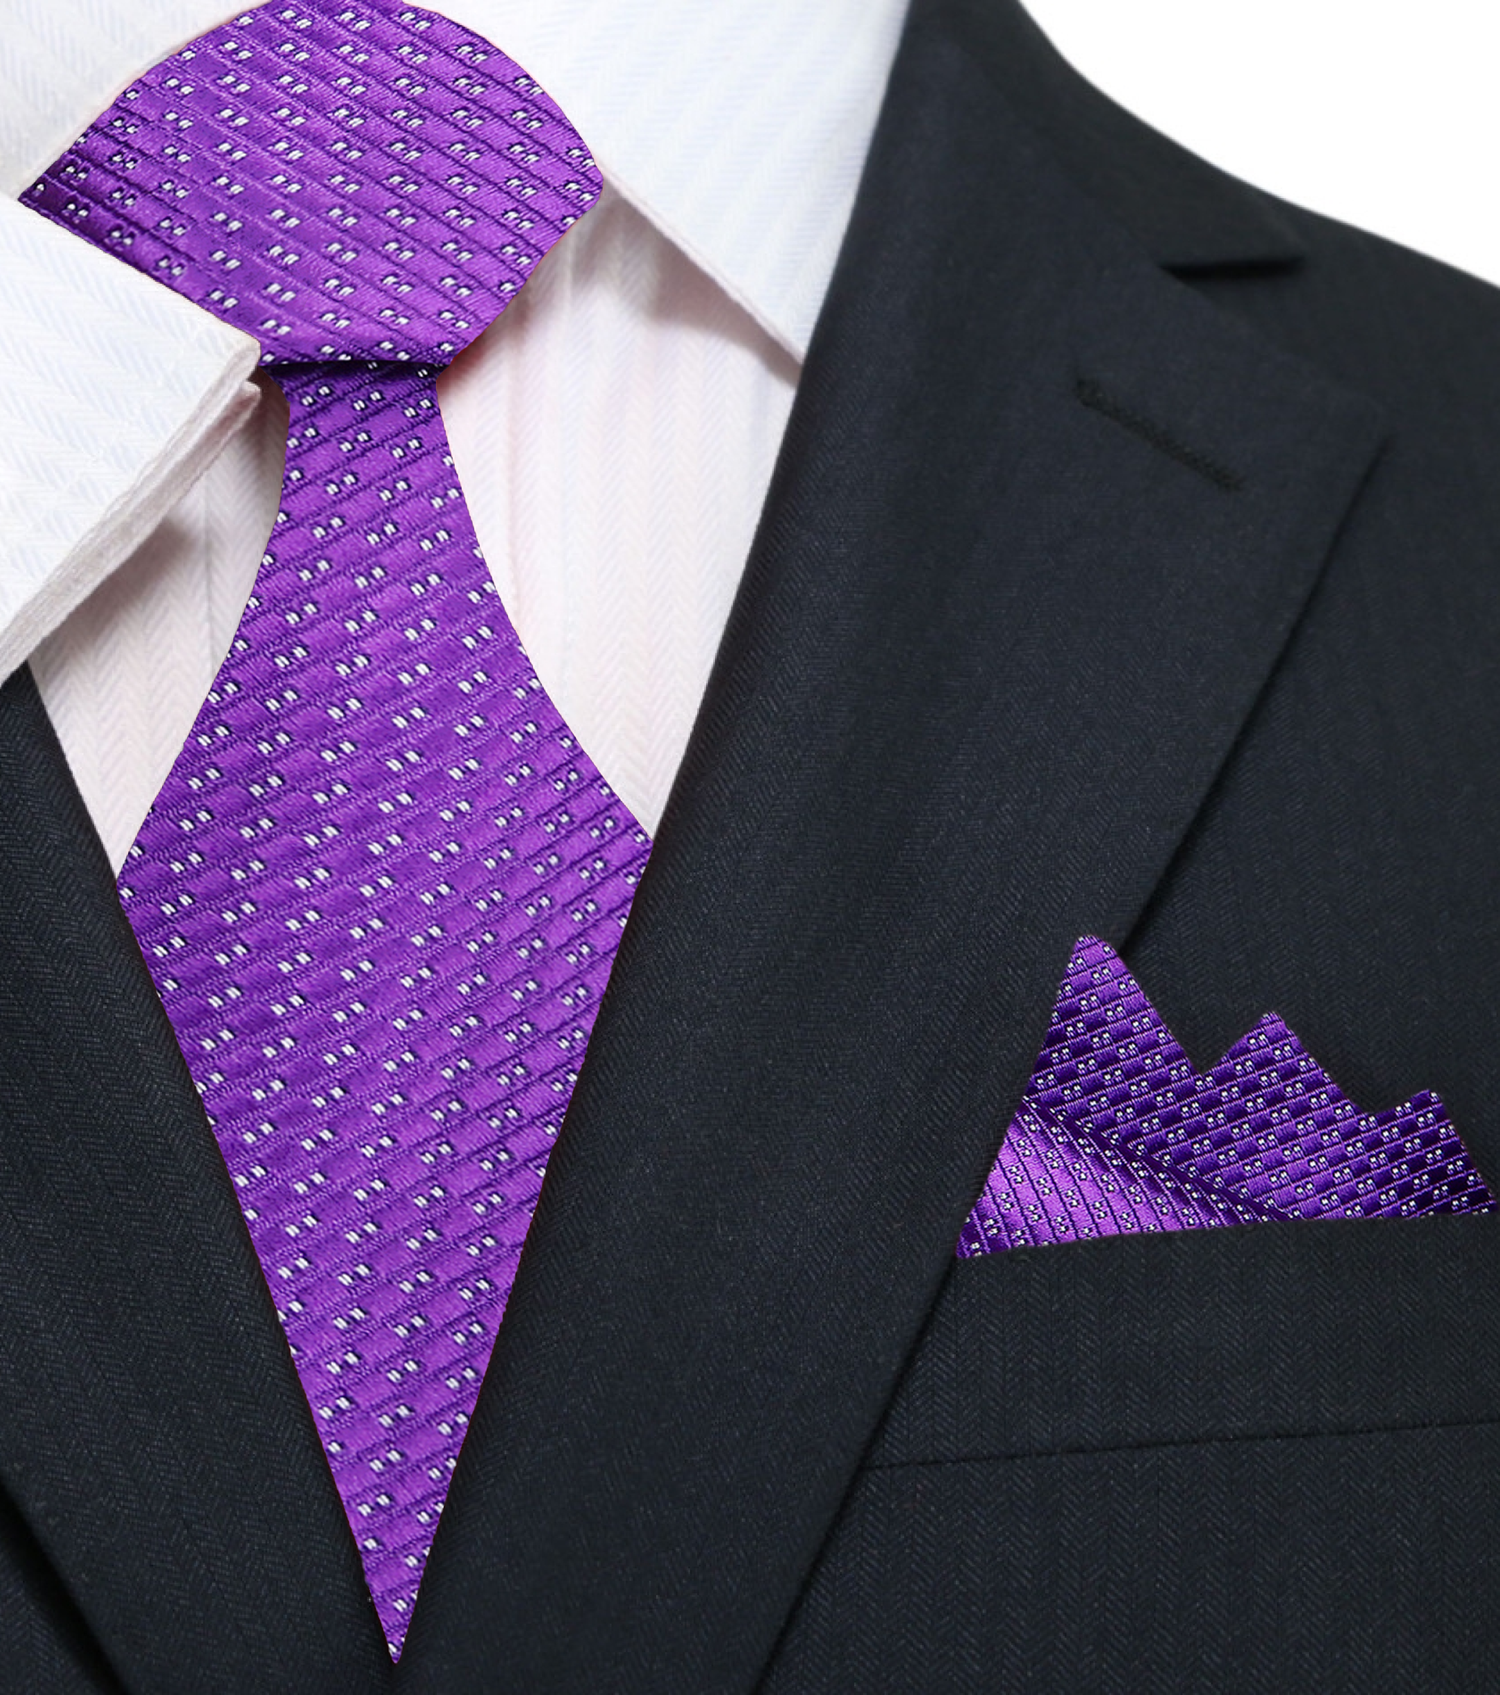 Main View: Purple with White Dots Tie and Pocket Square